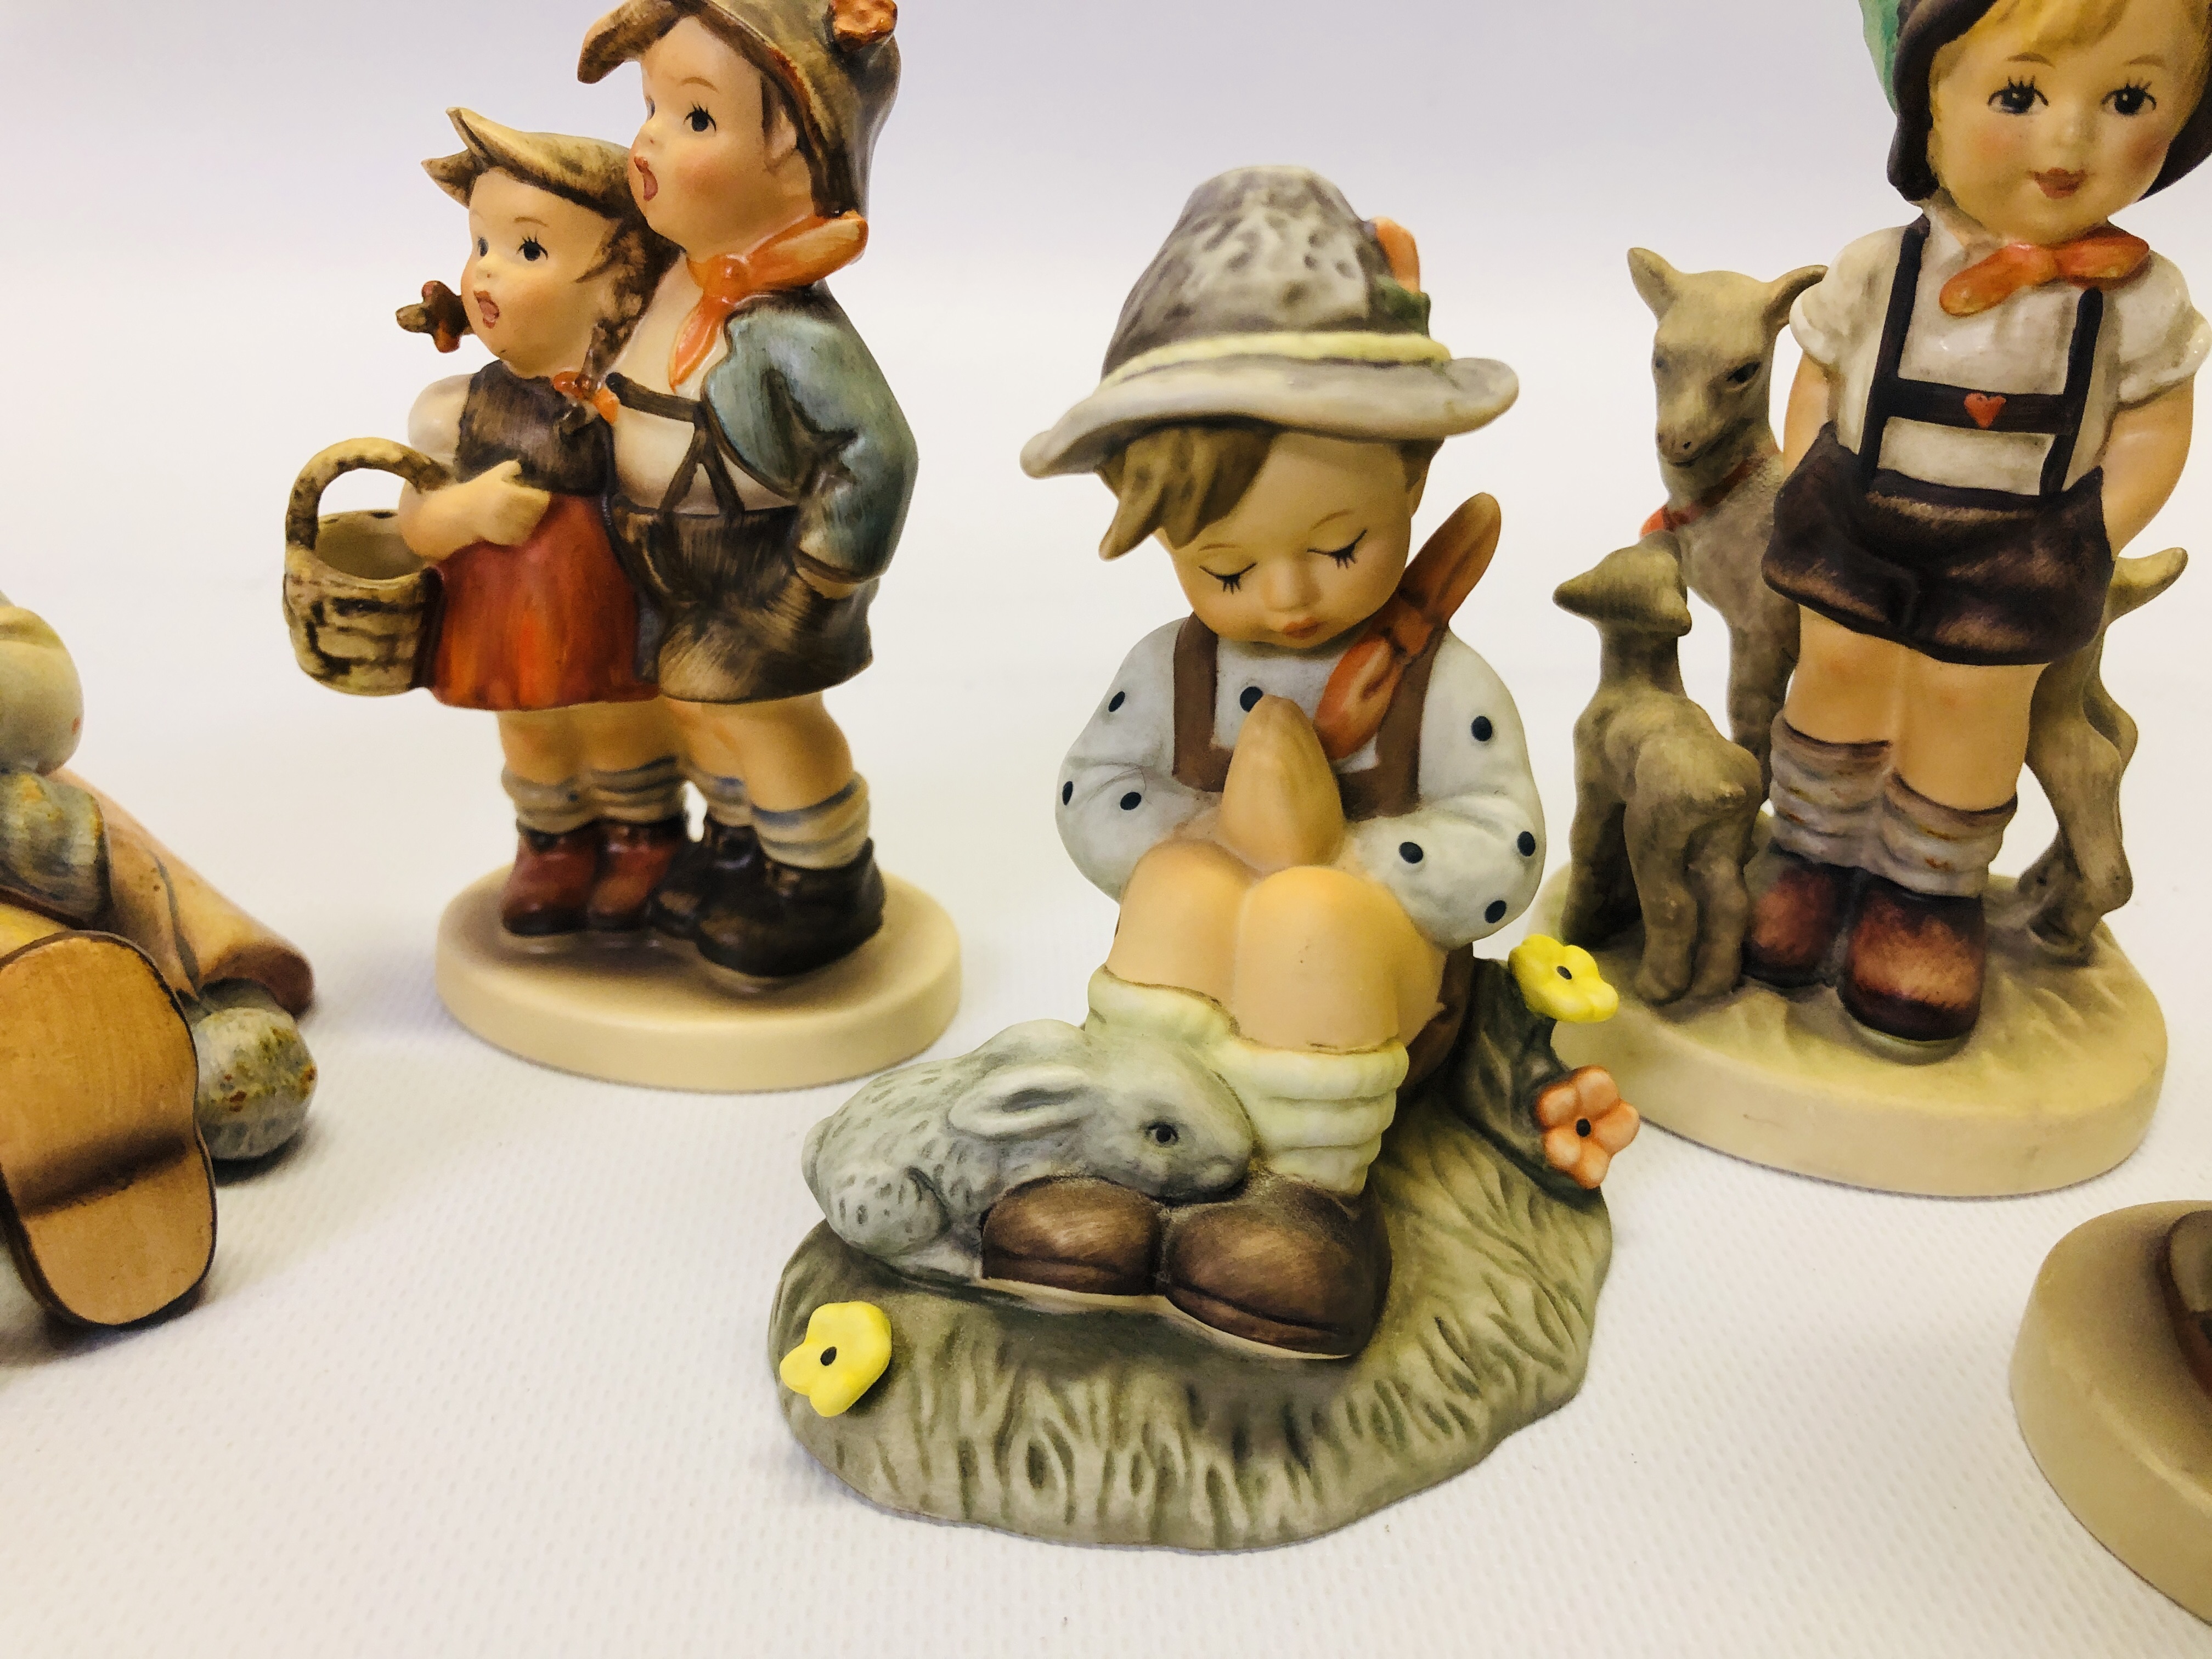 A GROUP OF 6 ASSORTED "GOEBEL" CABINET ORNAMENTS T O INCLUDE "LITTLE HELPER" NATURES PRAYER BH55 - Image 5 of 10